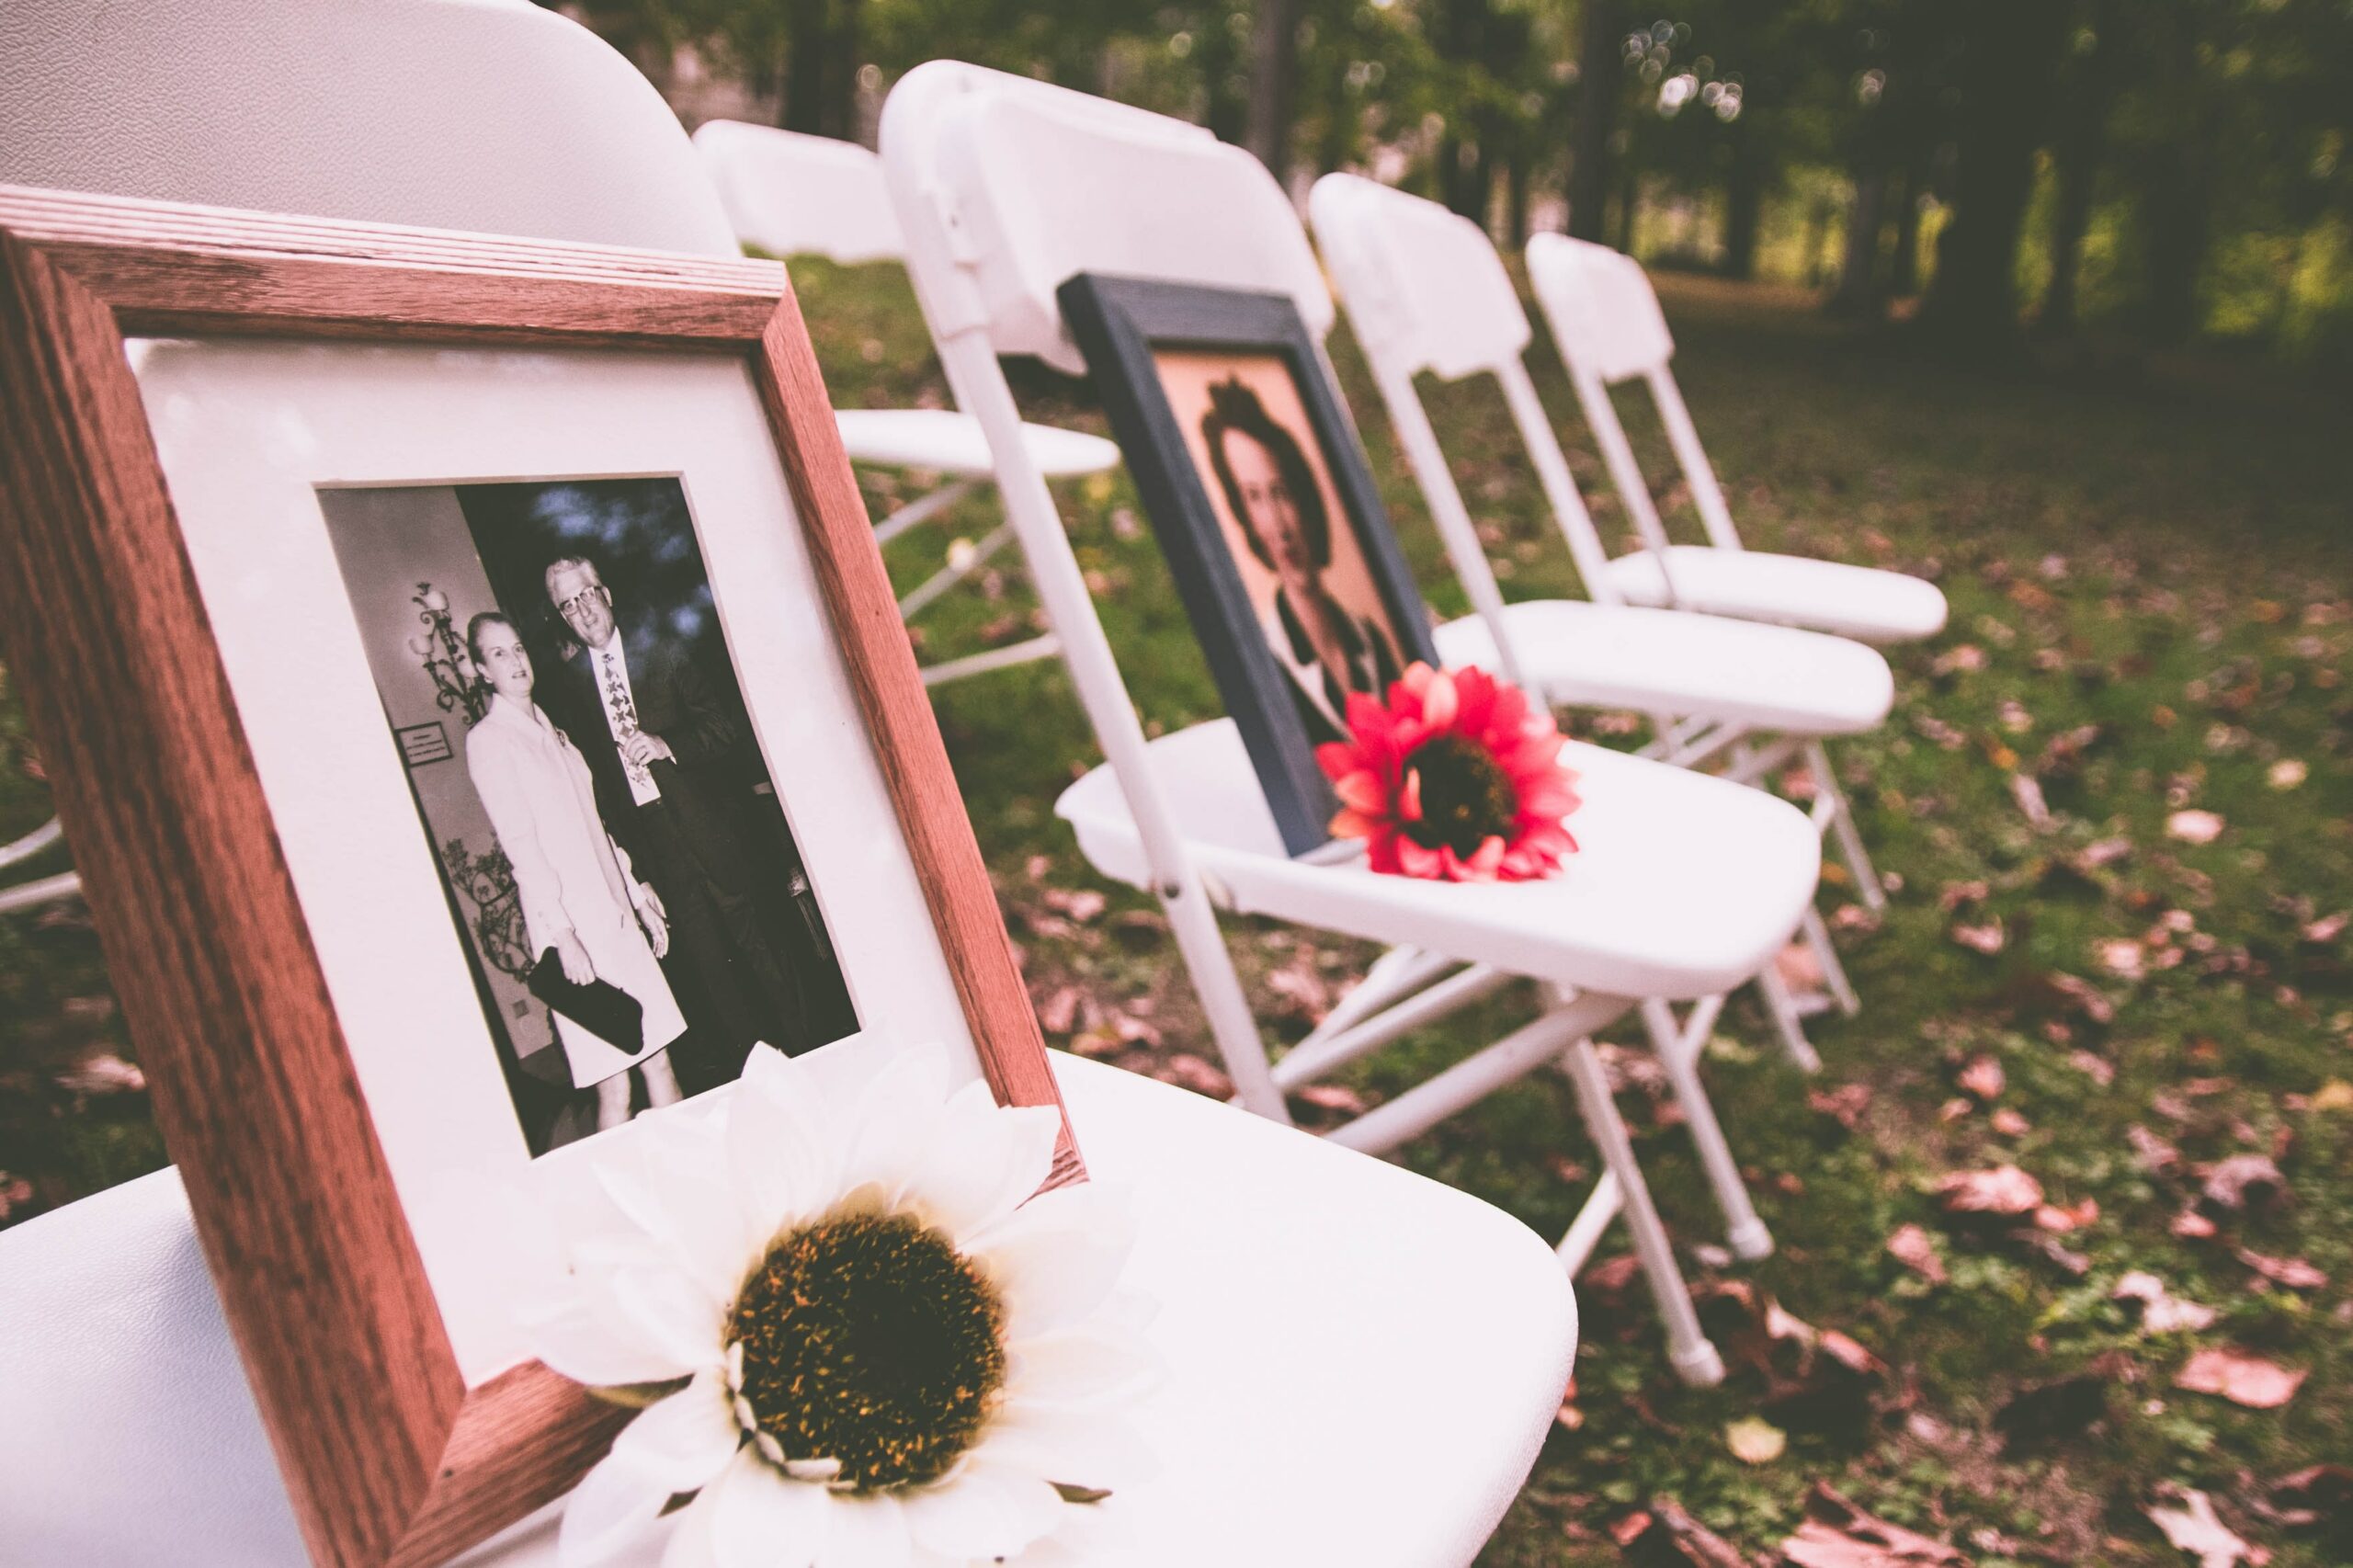 Ceremony Personalization scaled